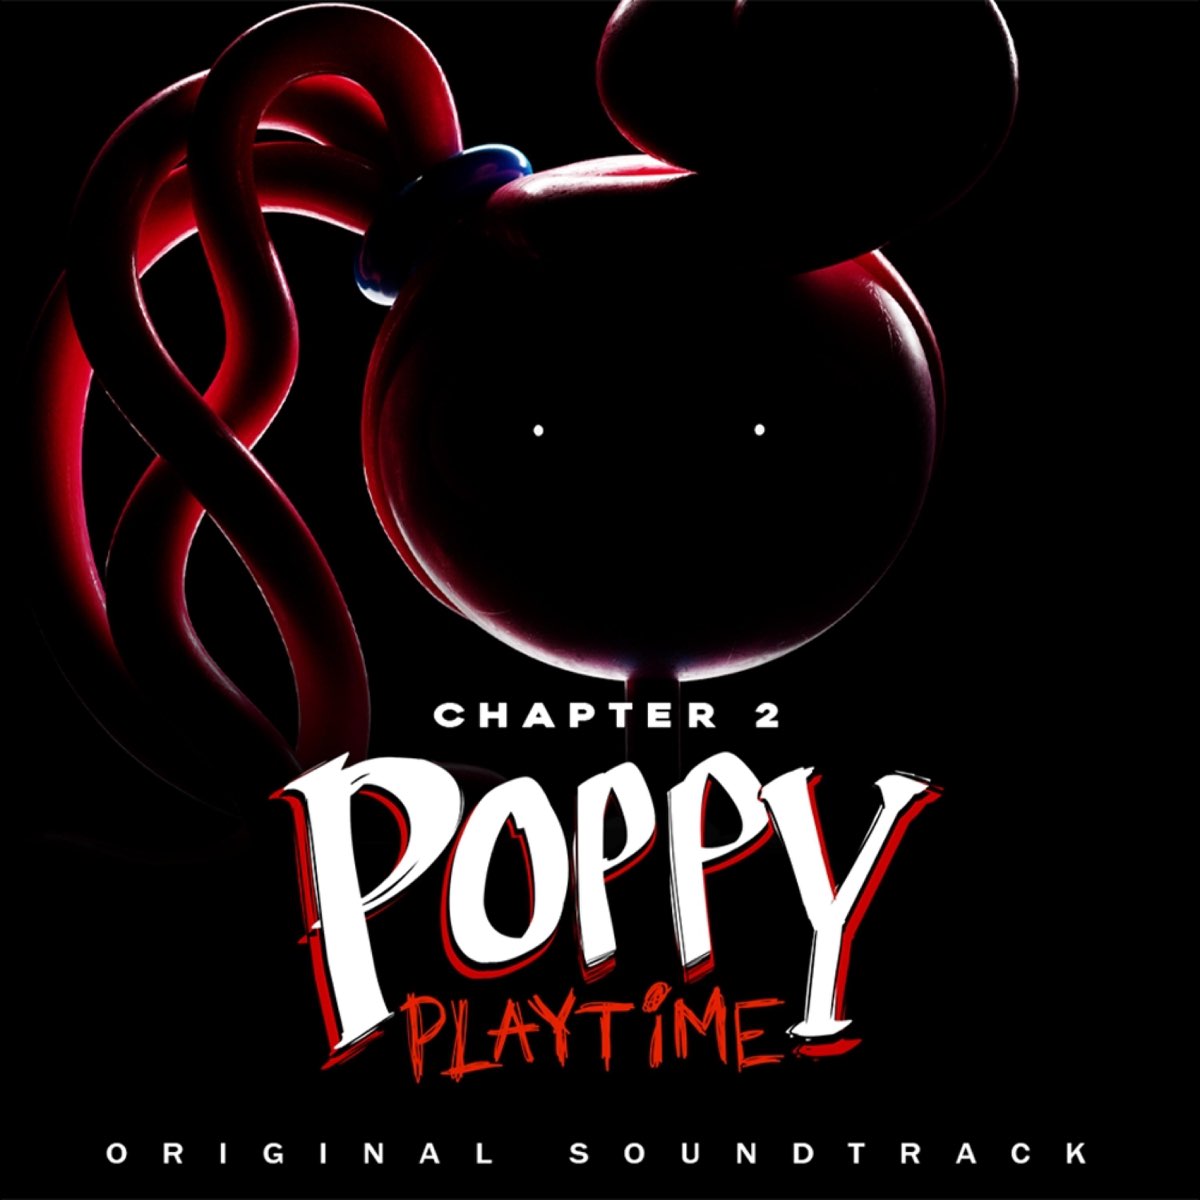 Poppy Playtime Ch. 2 (Original Game Soundtrack) by MOB Games